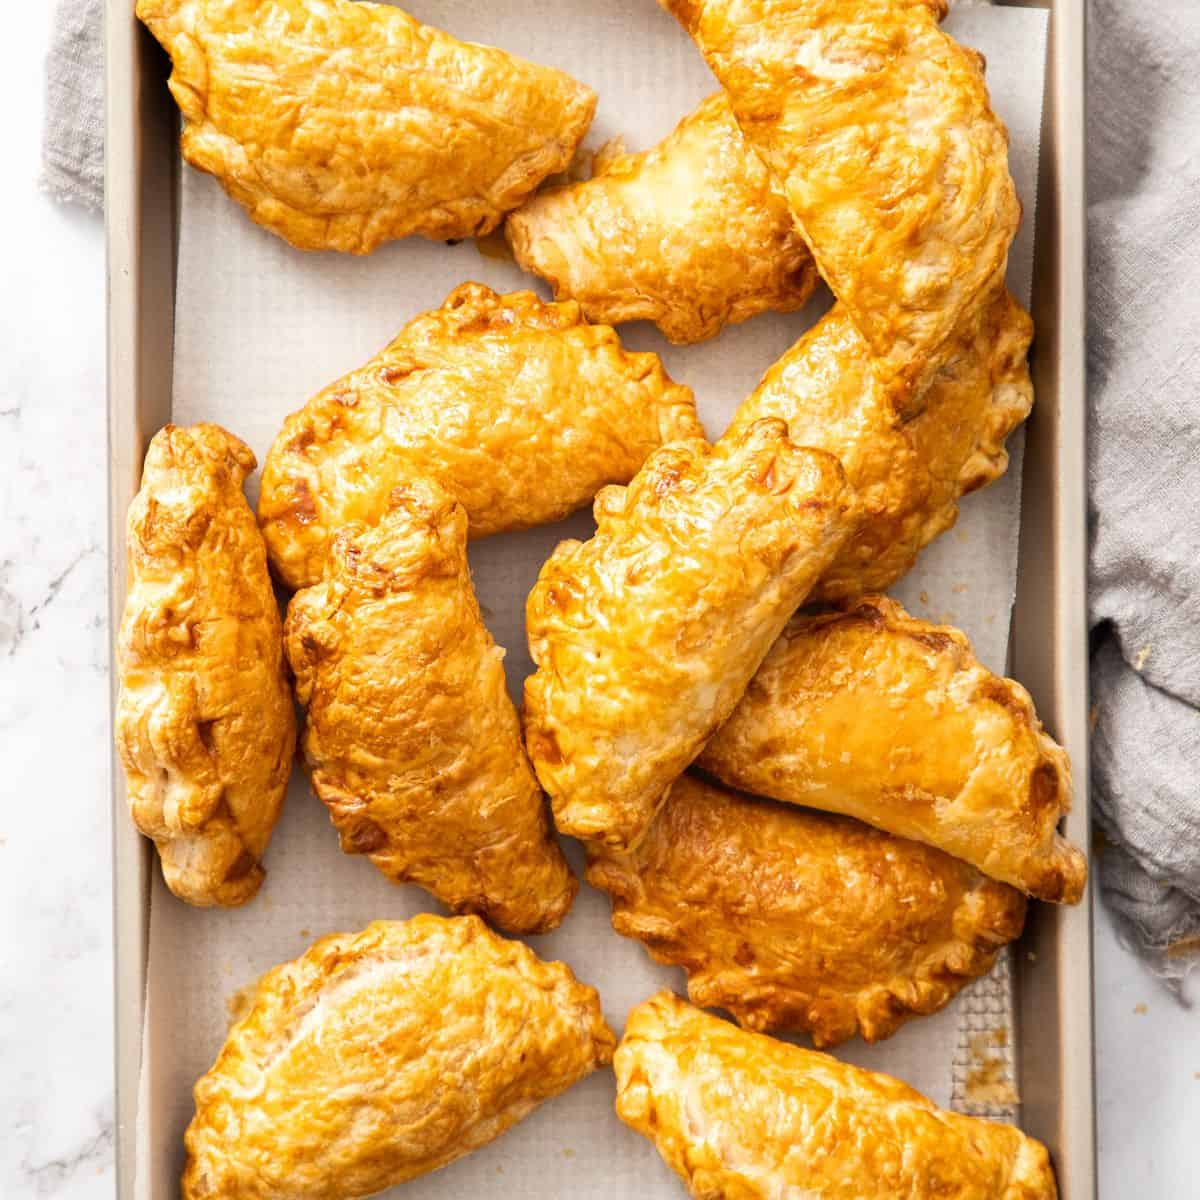 Savoury Puff Pastry Recipes - It's Not Complicated Recipes